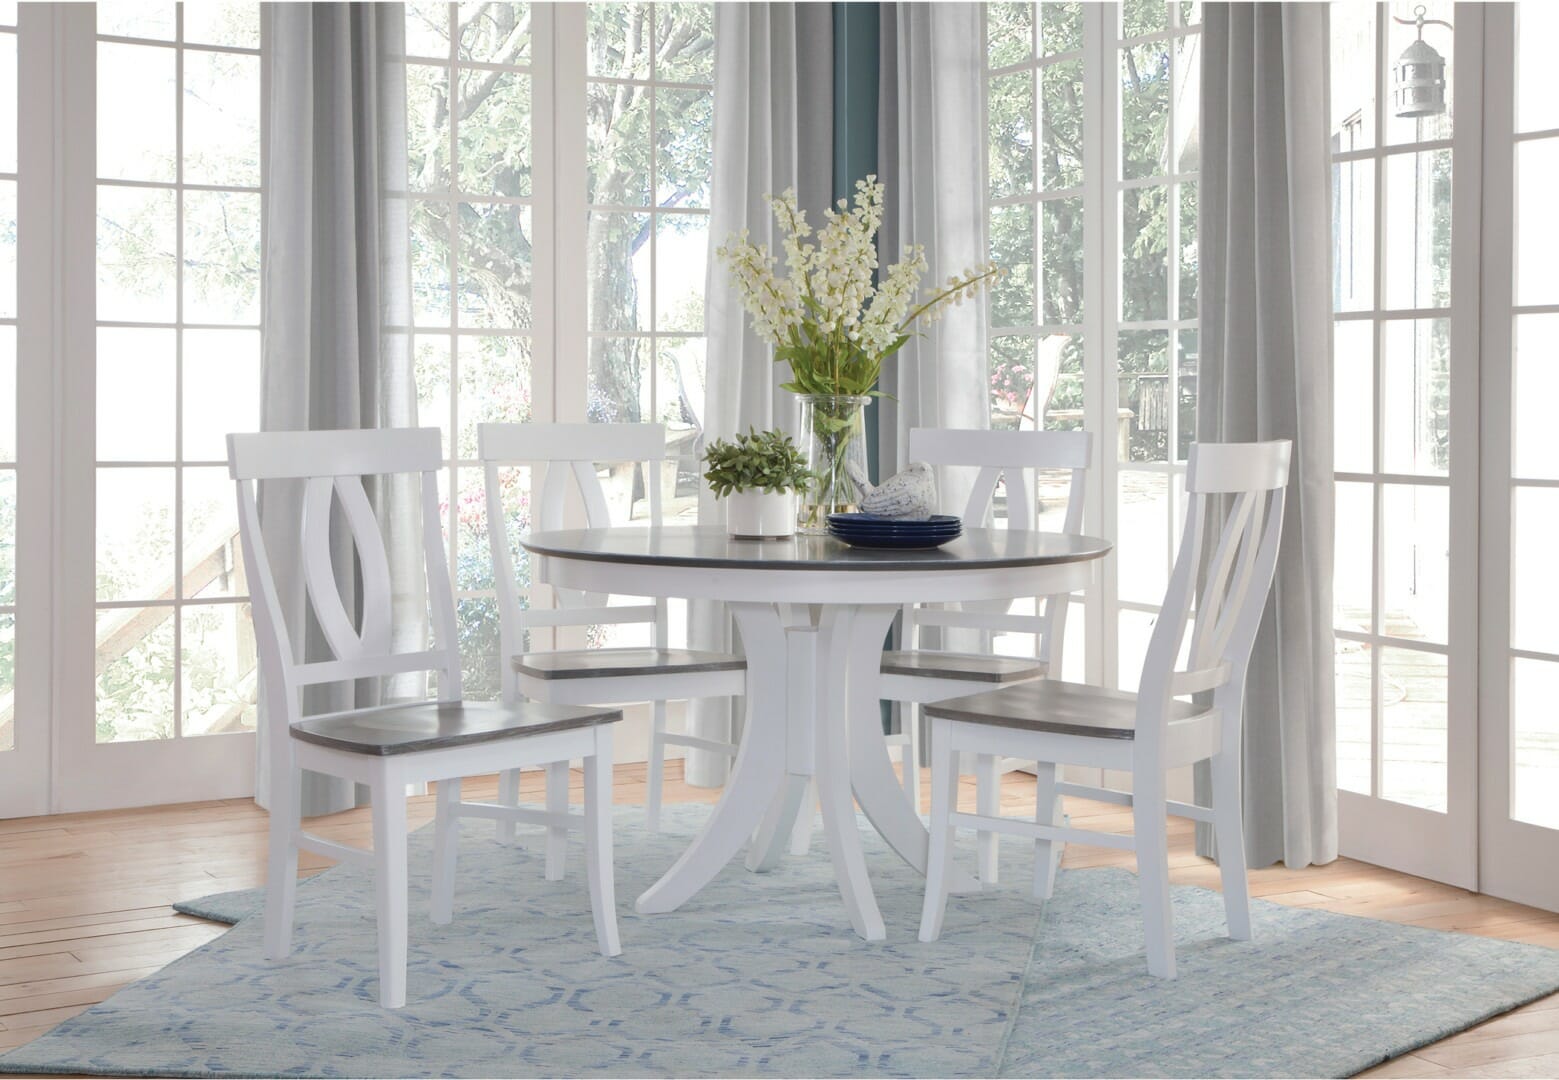 T05 148rt 30 170 Sienna Round Table 4, 30 Inch Round Dining Table And Chairs